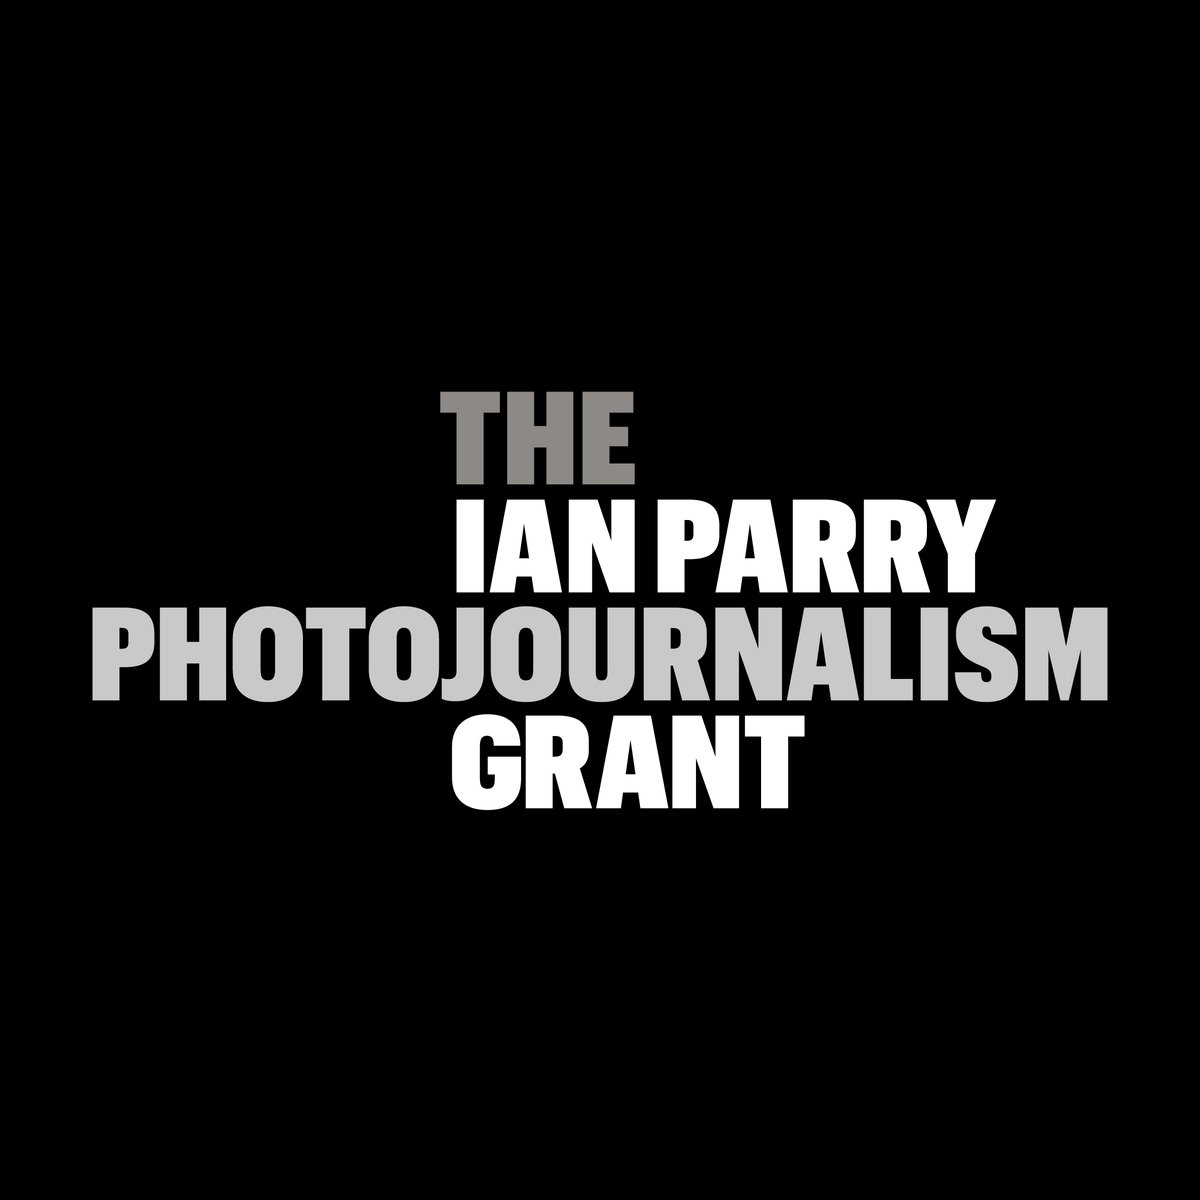 The Ian Parry Photojournalism Grant (@IanParryGrant) has relaunched! Created in the memory of Ian Parry, who was killed while on assignment for The Sunday Times in 1989, the grant has helped countless of young photojournalists over the last 30 years: ianparry.org